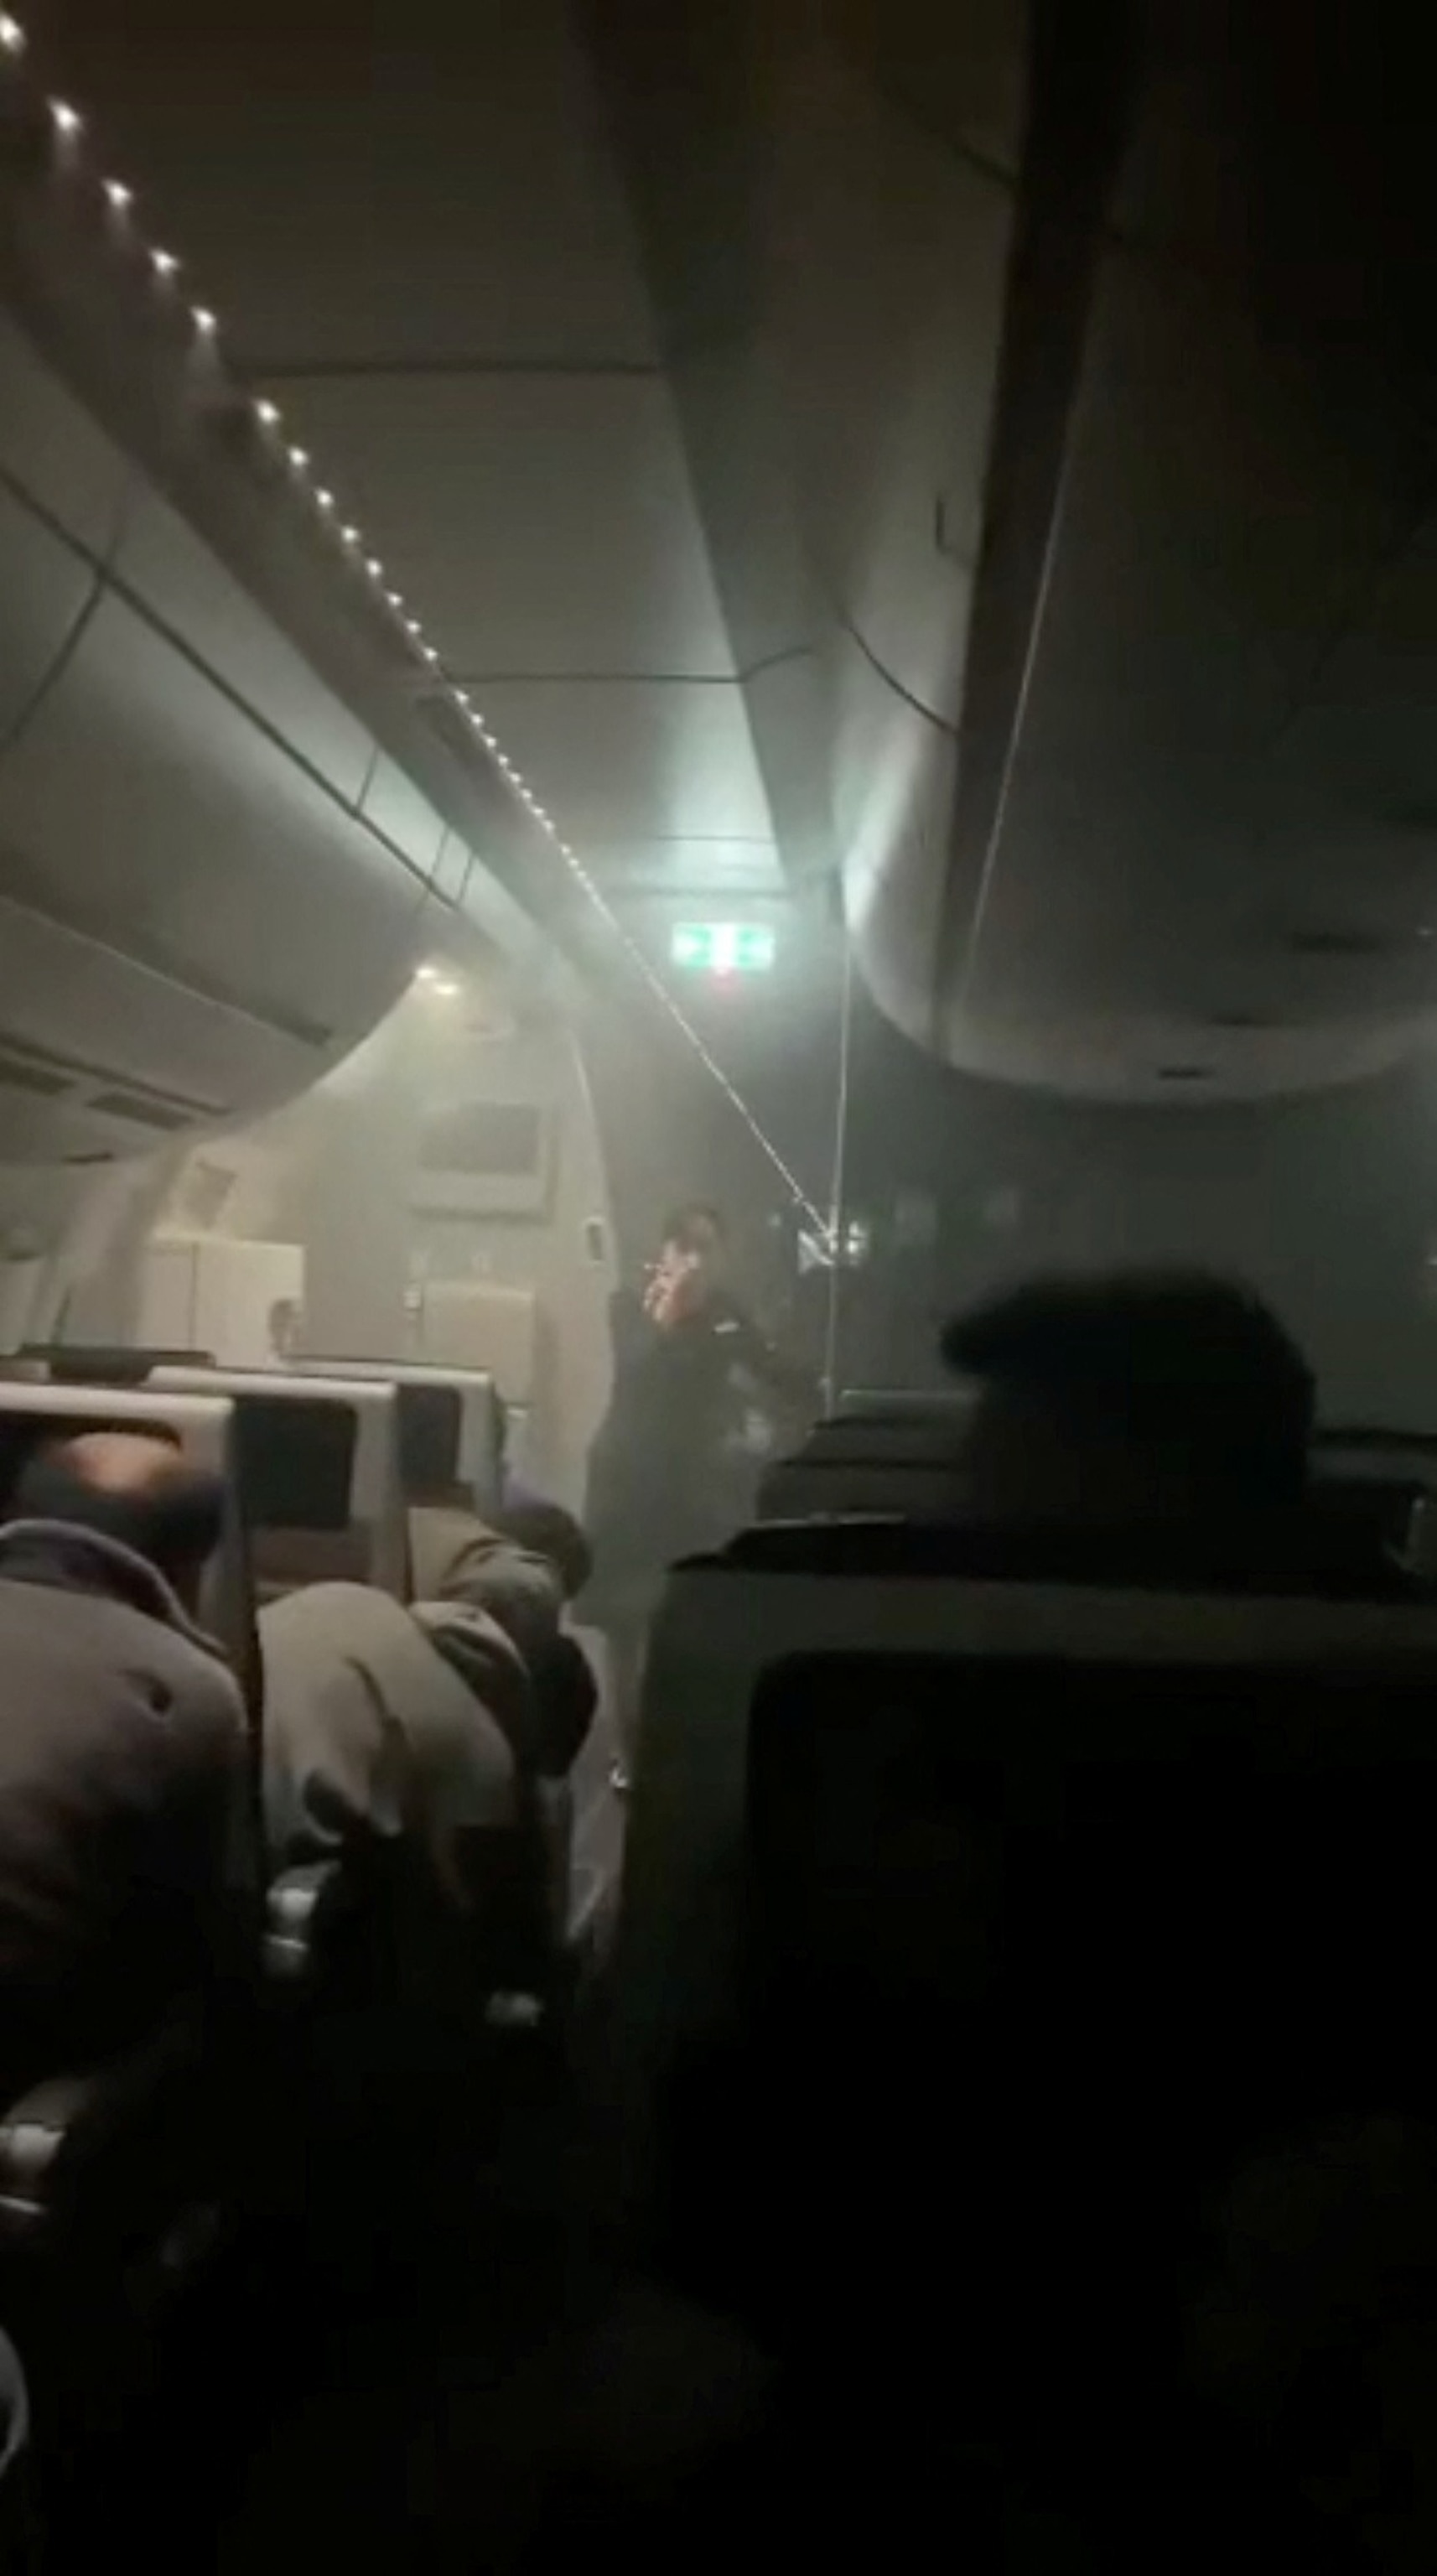 Image: People sit amid smoke inside a Japan Airlines A350 plane in this image obtained from a video on social media.